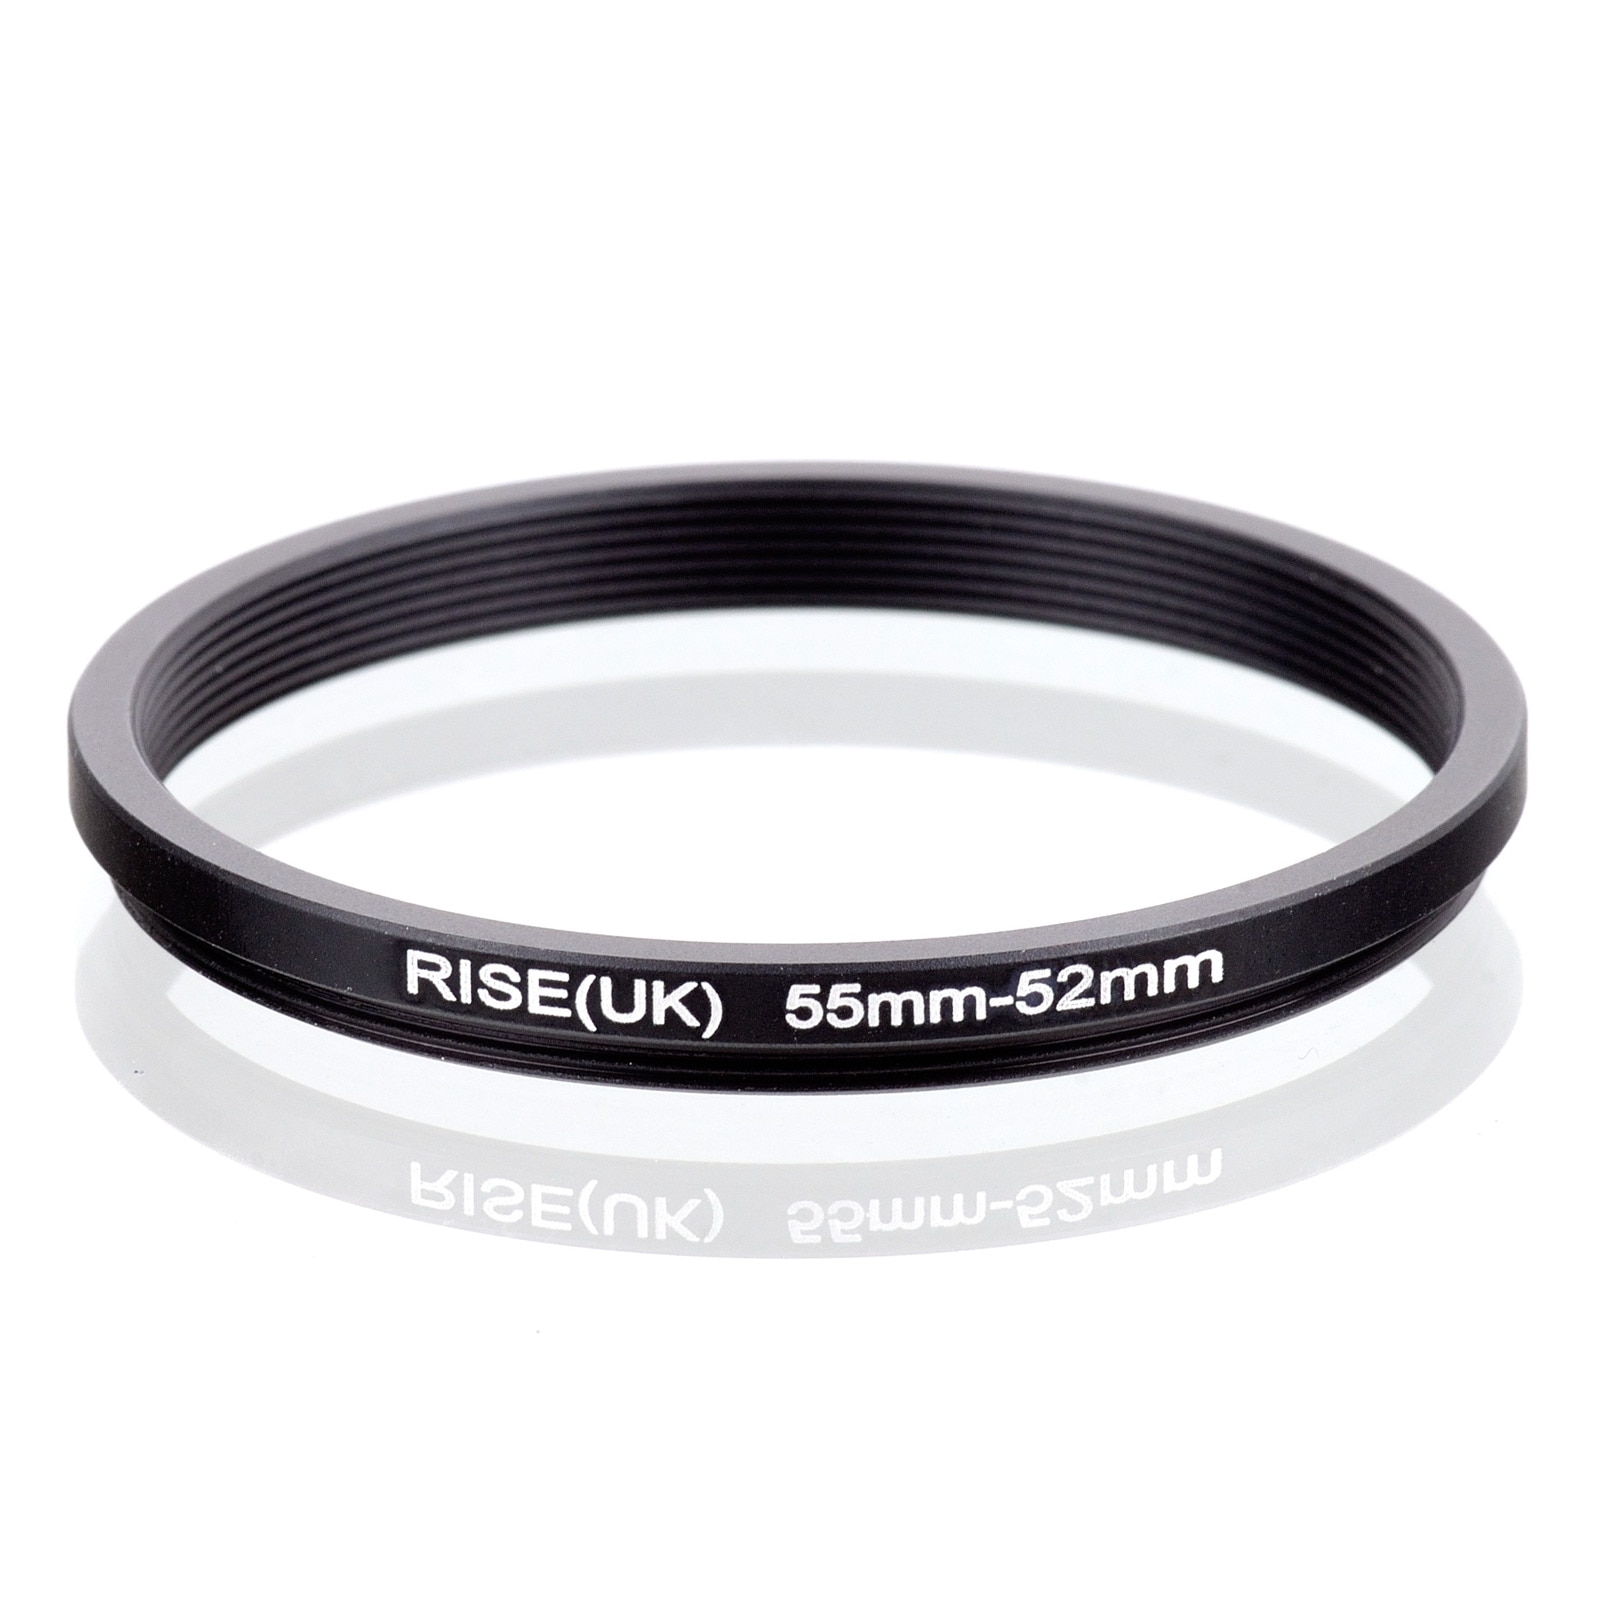 Rise (Uk) 55 Mm-52 Mm 55-52 Mm 55 Te 52 Step Down Filter Adapter Ring